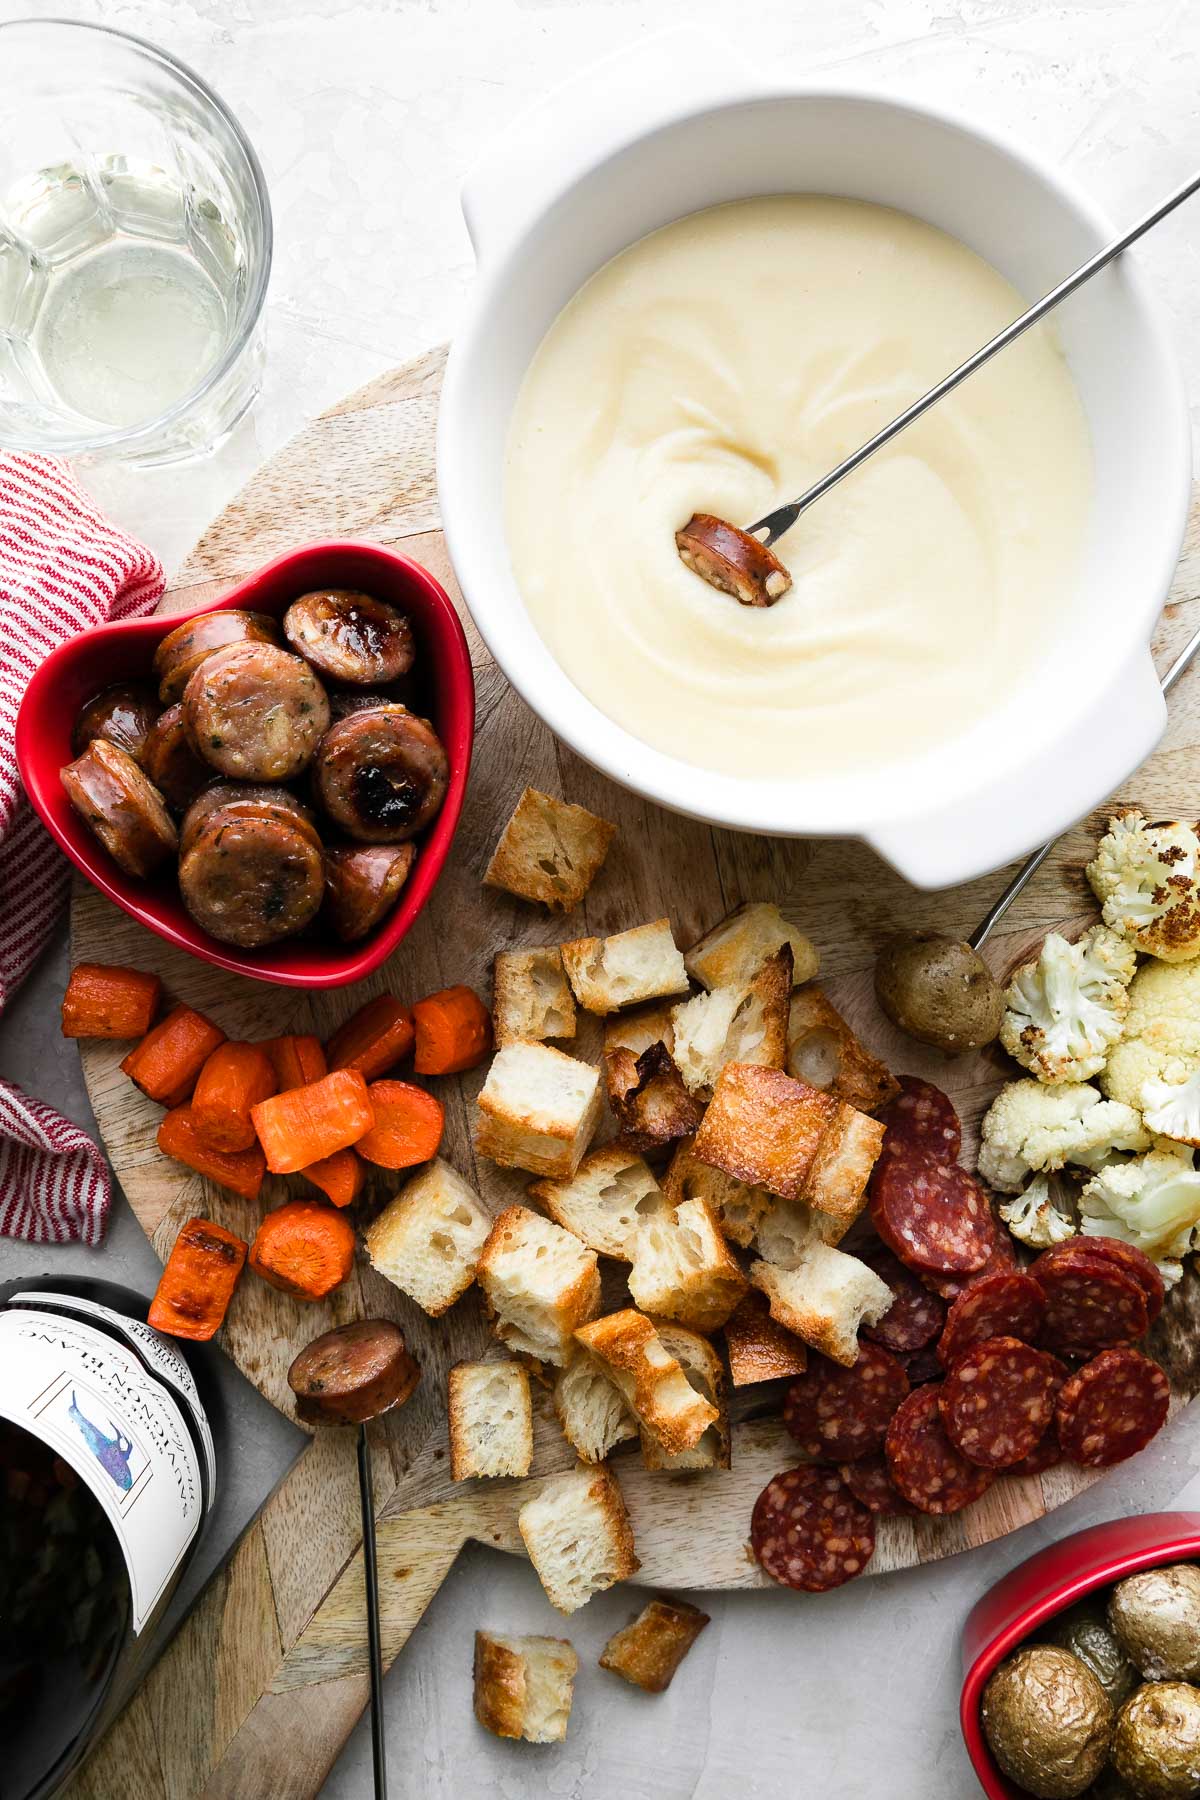 https://playswellwithbutter.com/wp-content/uploads/2022/01/Cheese-Fondue-for-Two-19.jpg